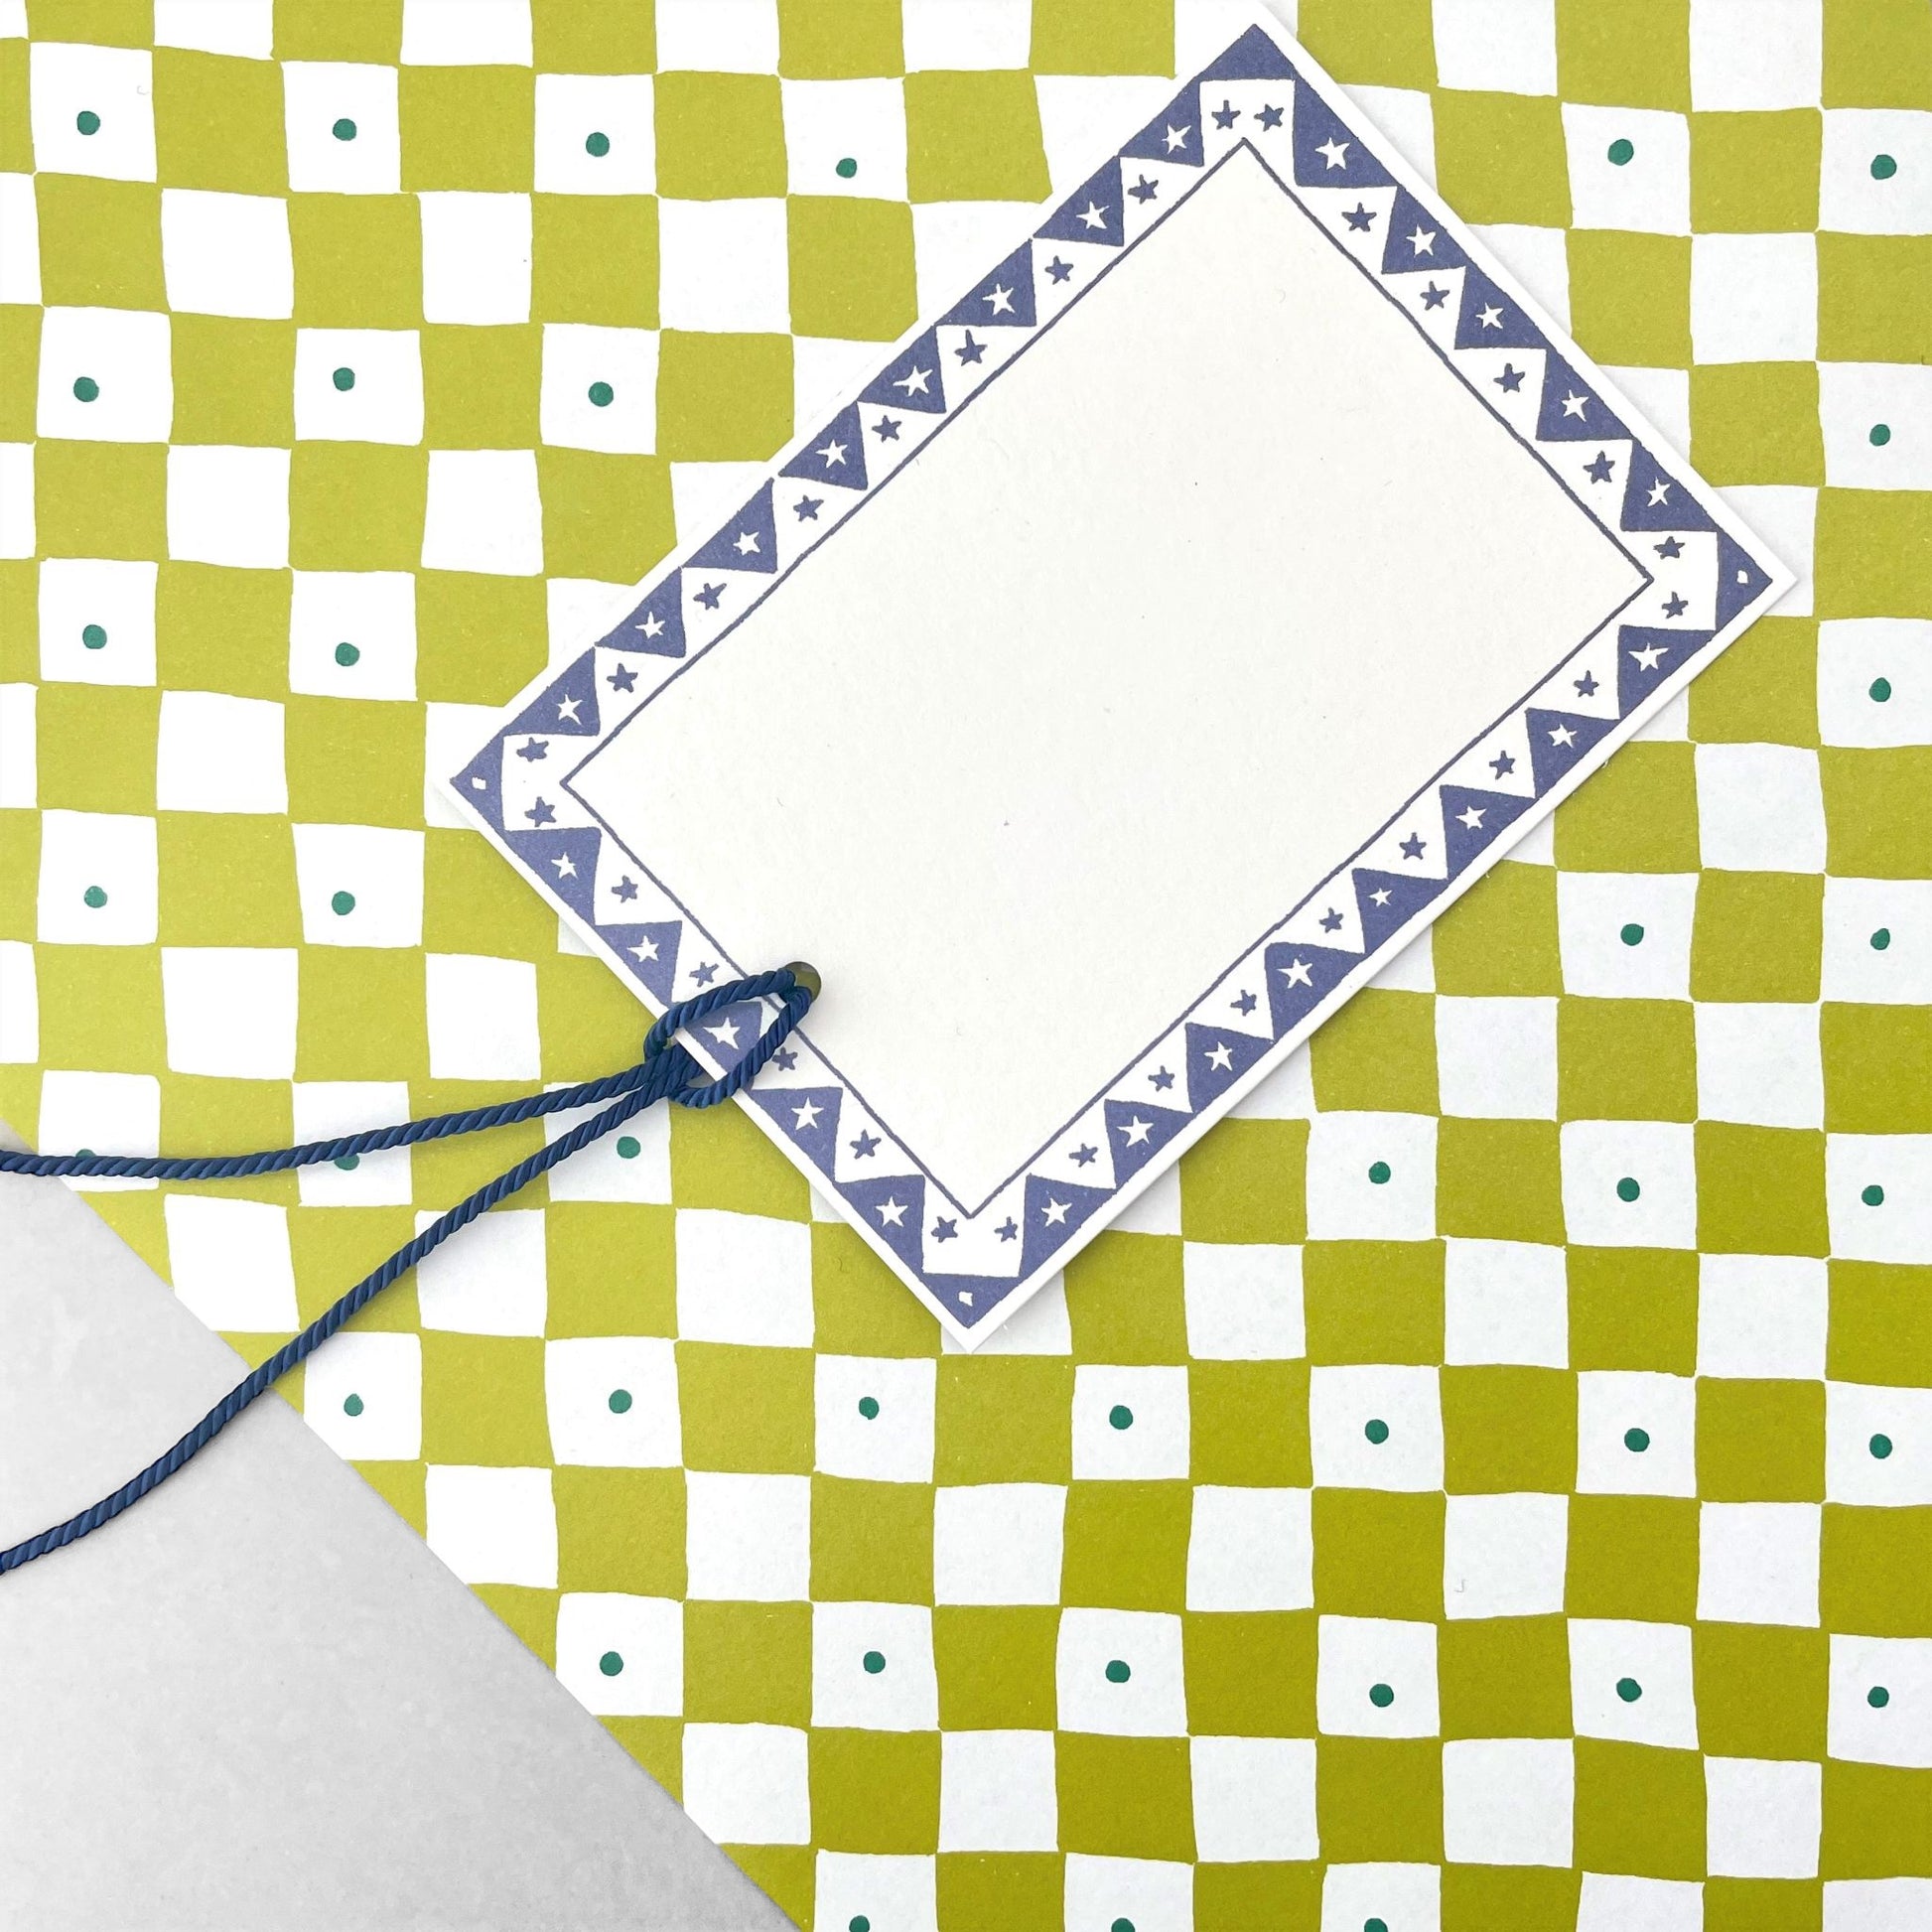 White rectangular gift tag with dark blue star pattern border and blue cord by Heather Evelyn